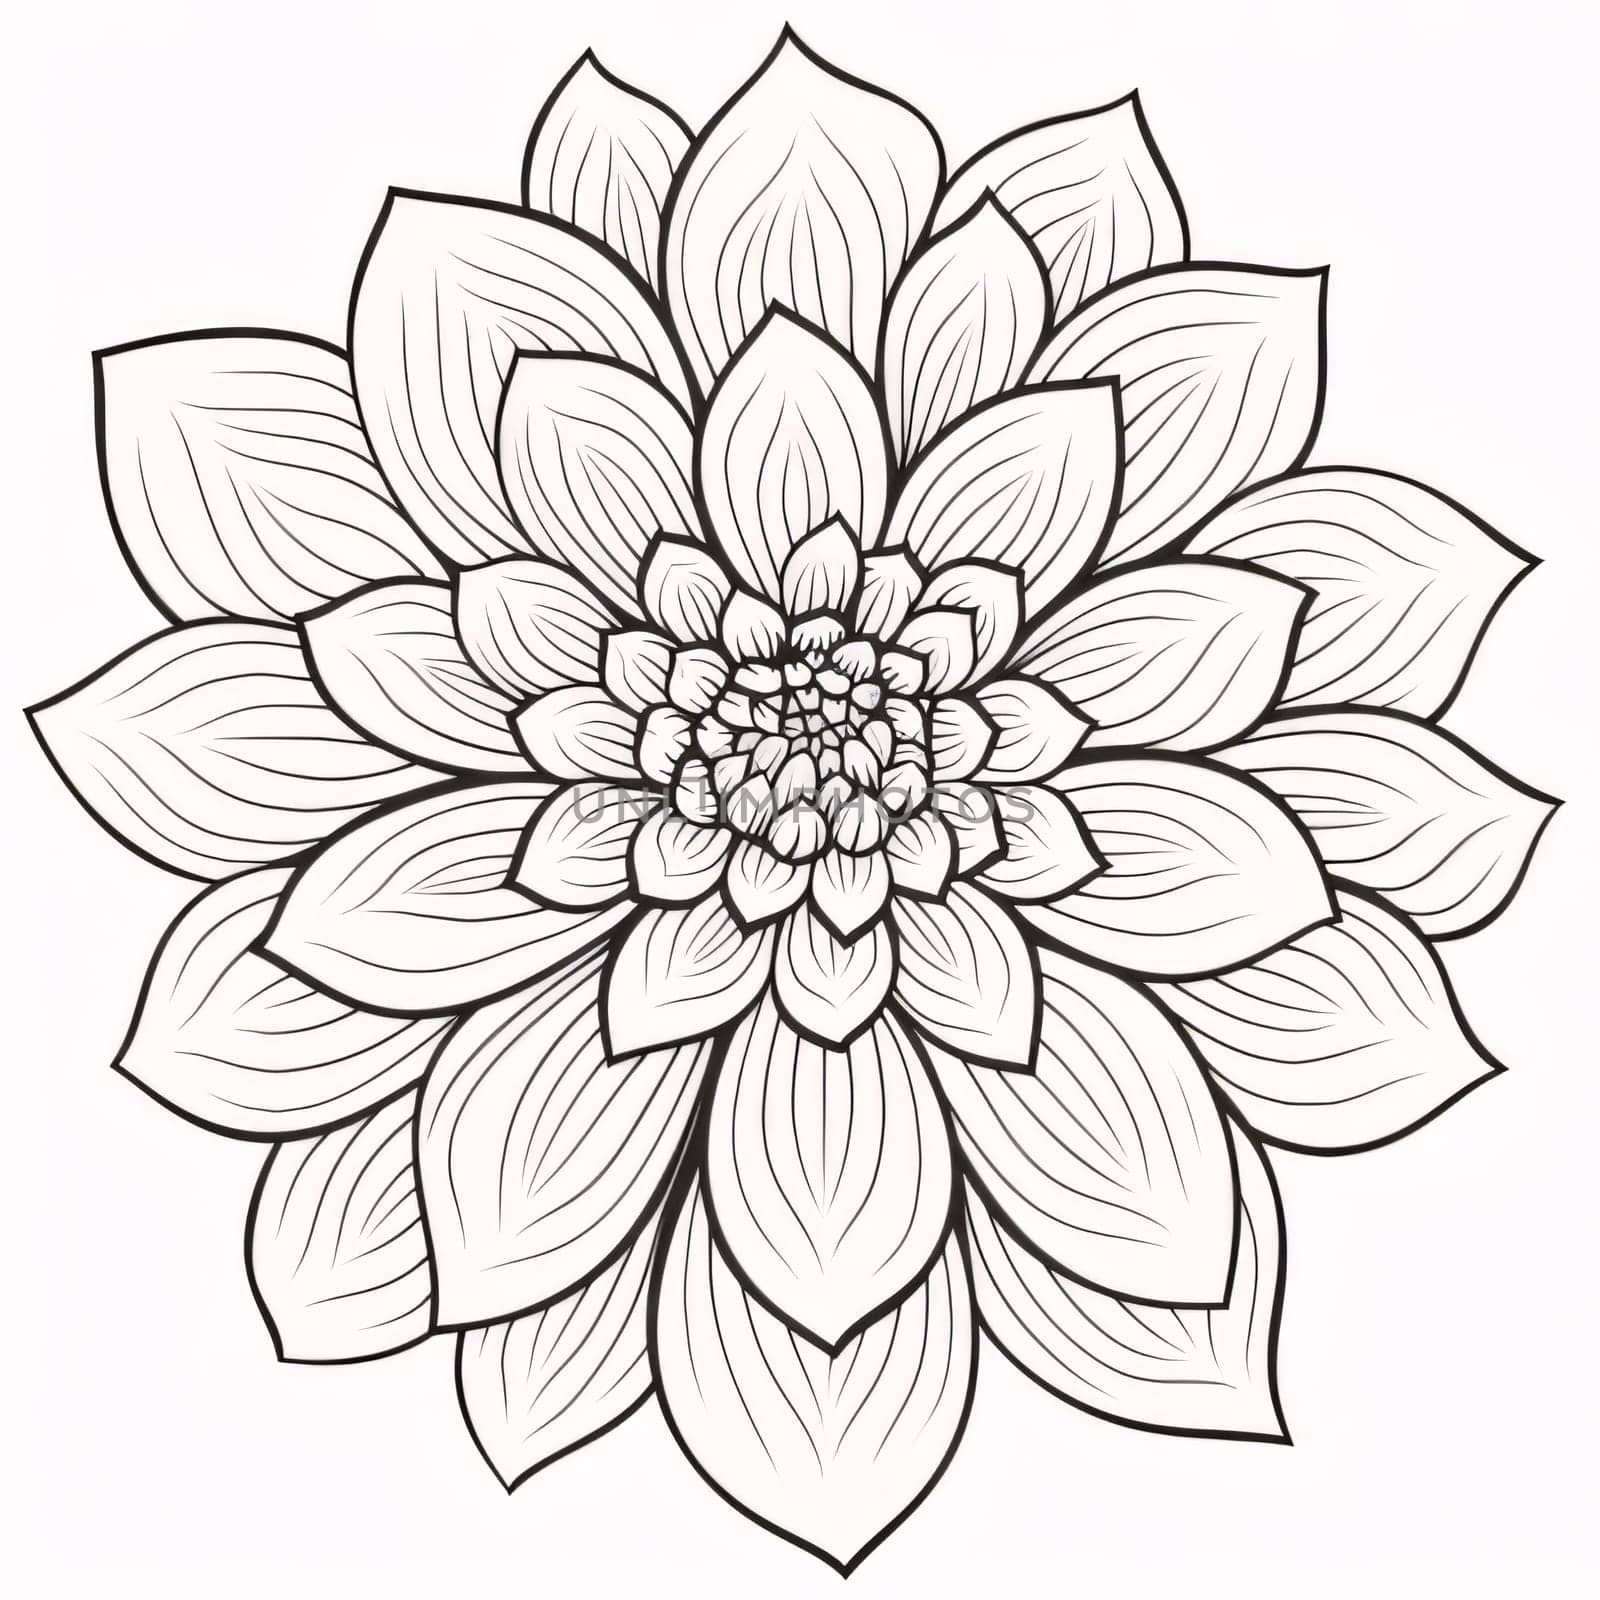 Black and white coloring sheet white dahlia flower. Flowering flowers, a symbol of spring, new life. by ThemesS